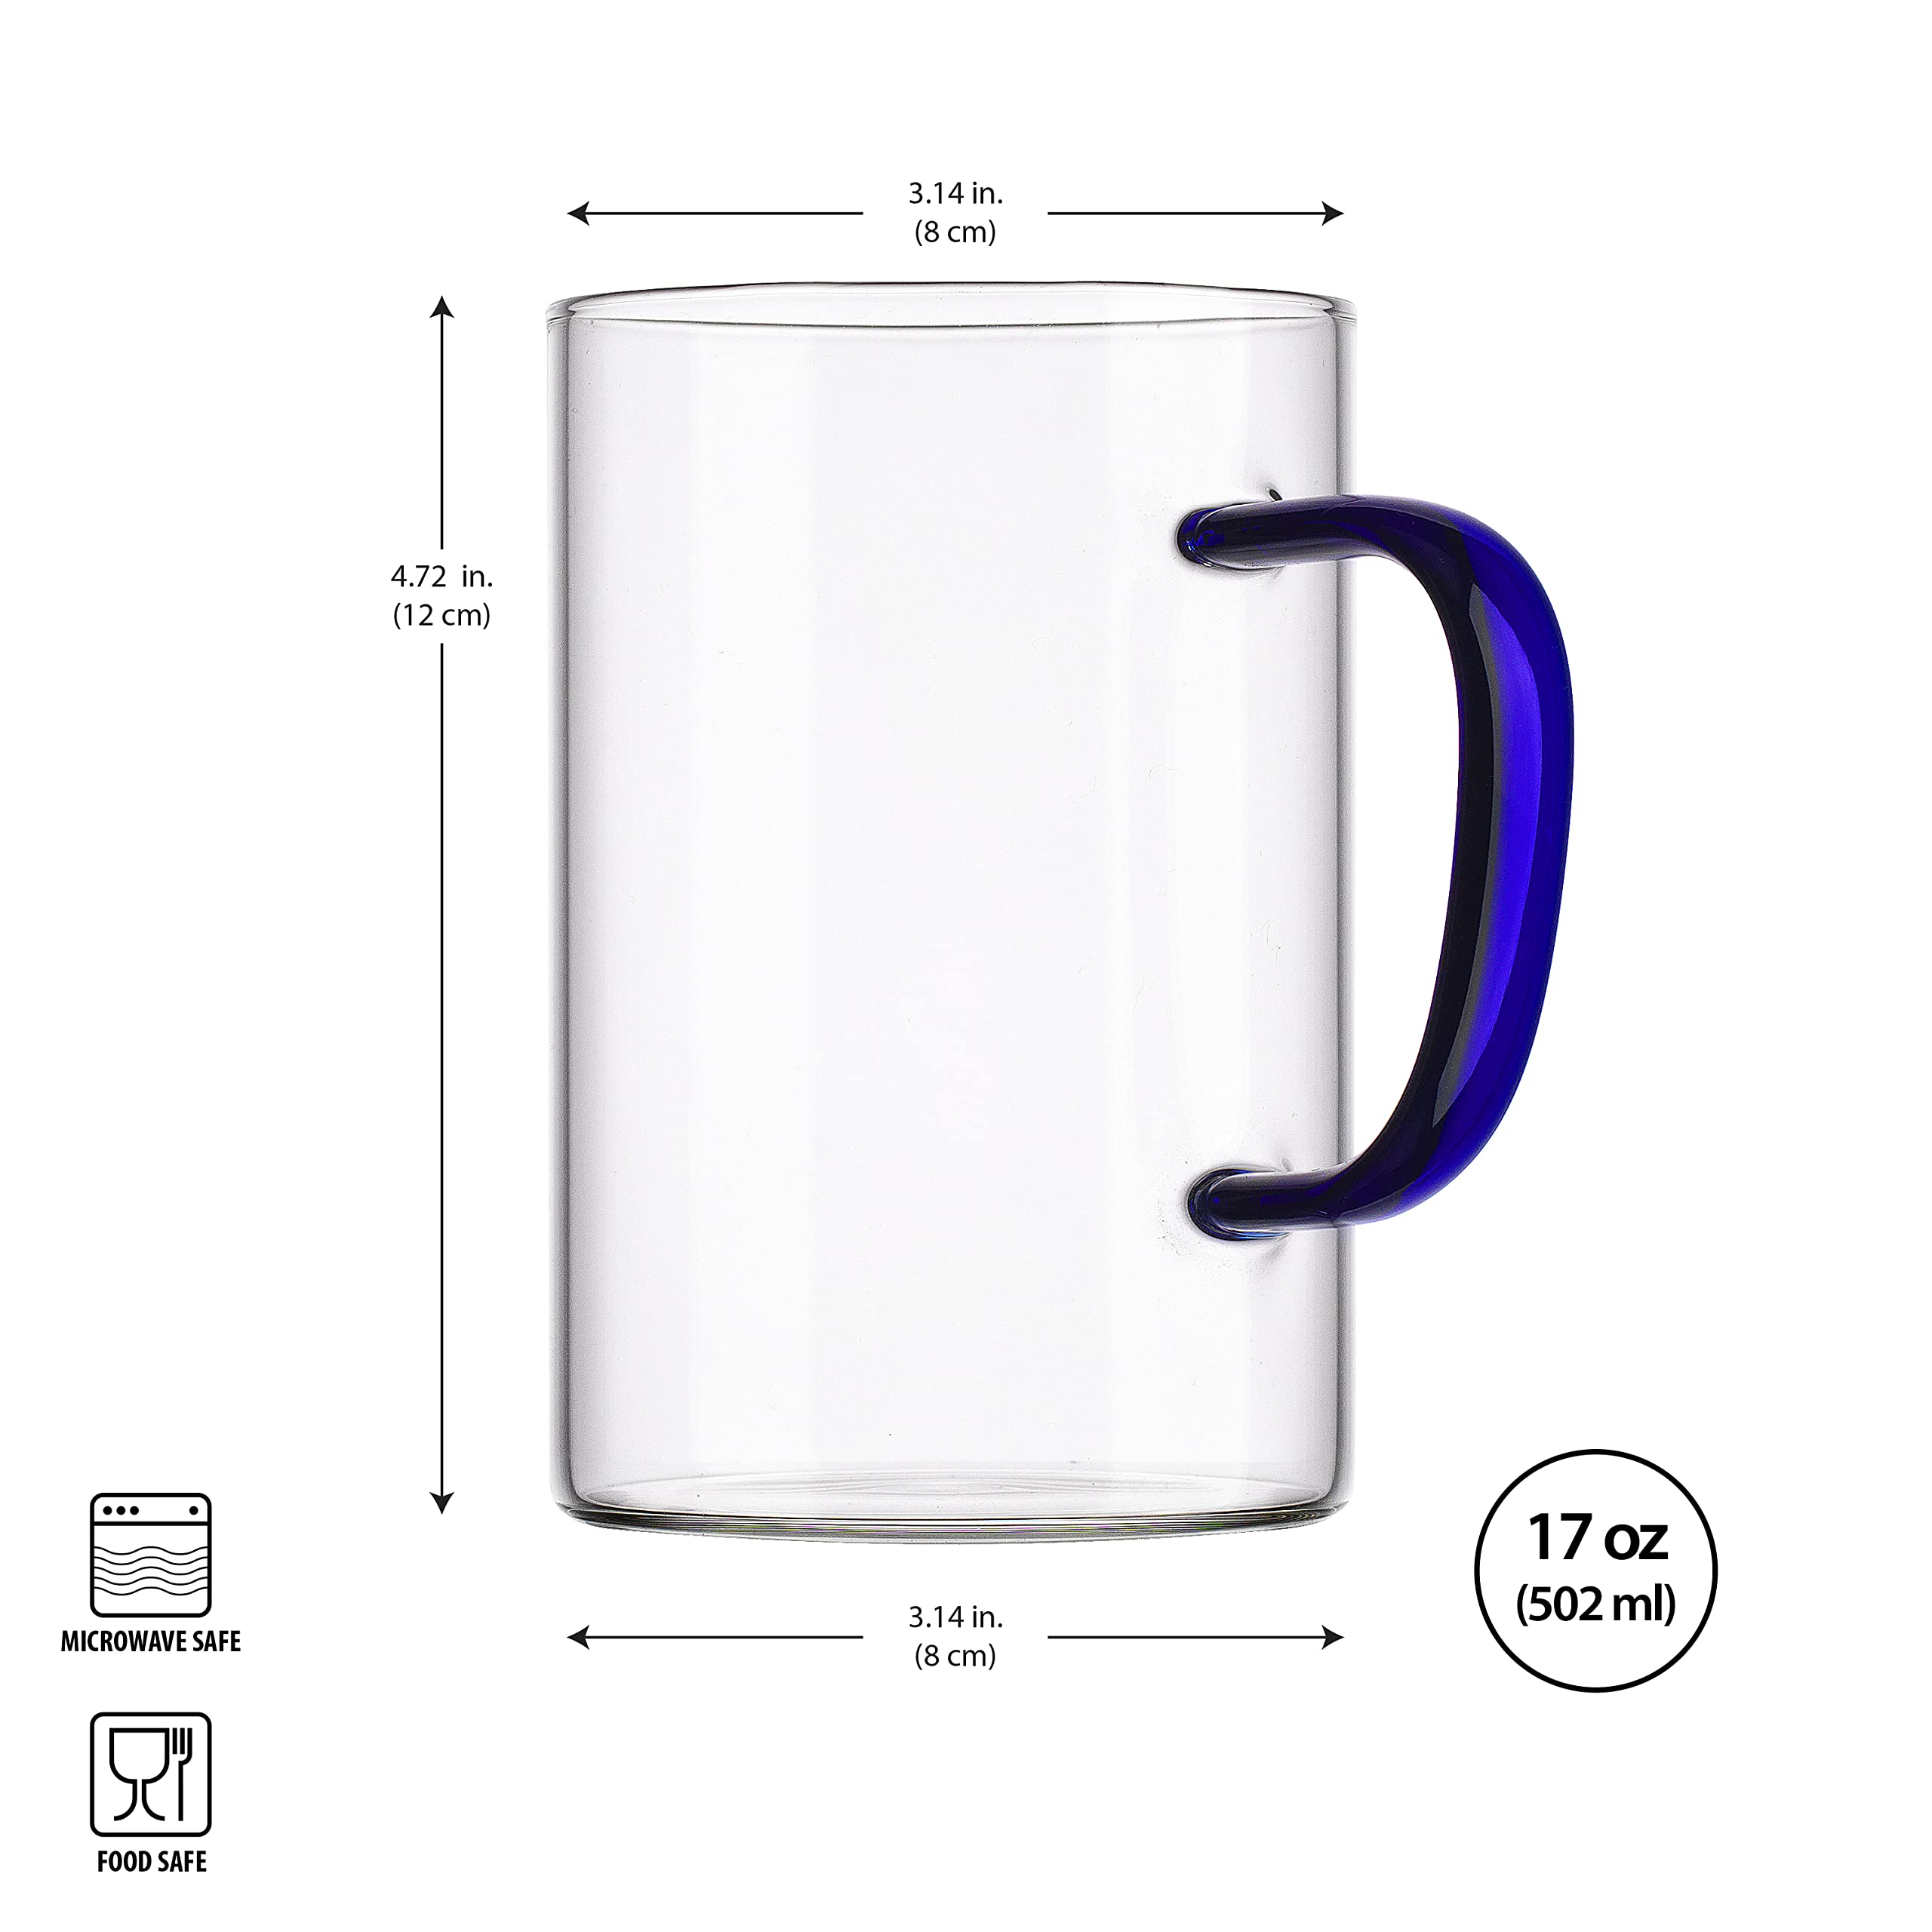 Glaver's Set of 2 Classic Coffee Mugs – Cups With Blue Colored Handles for Espresso, Tea – 17 Oz Coffee Mugs –Ideal for Any Modern Kitchen, Bar, Pub, Dishwasher safe